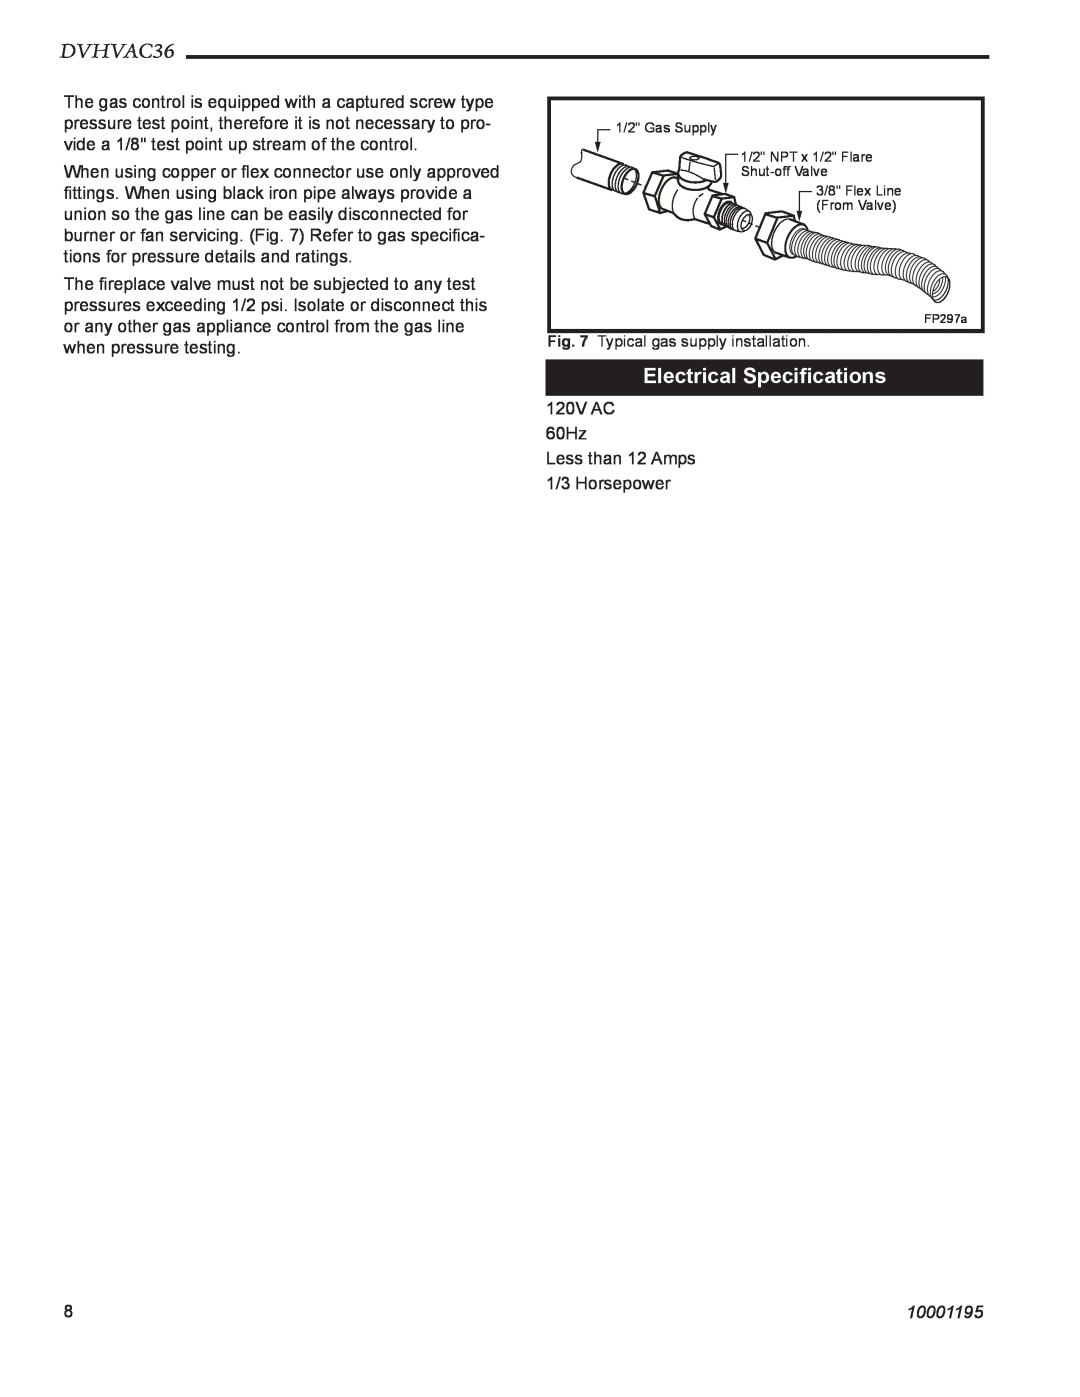 Vermont Casting DVHVAC36 manual Electrical Speciﬁcations, 10001195 